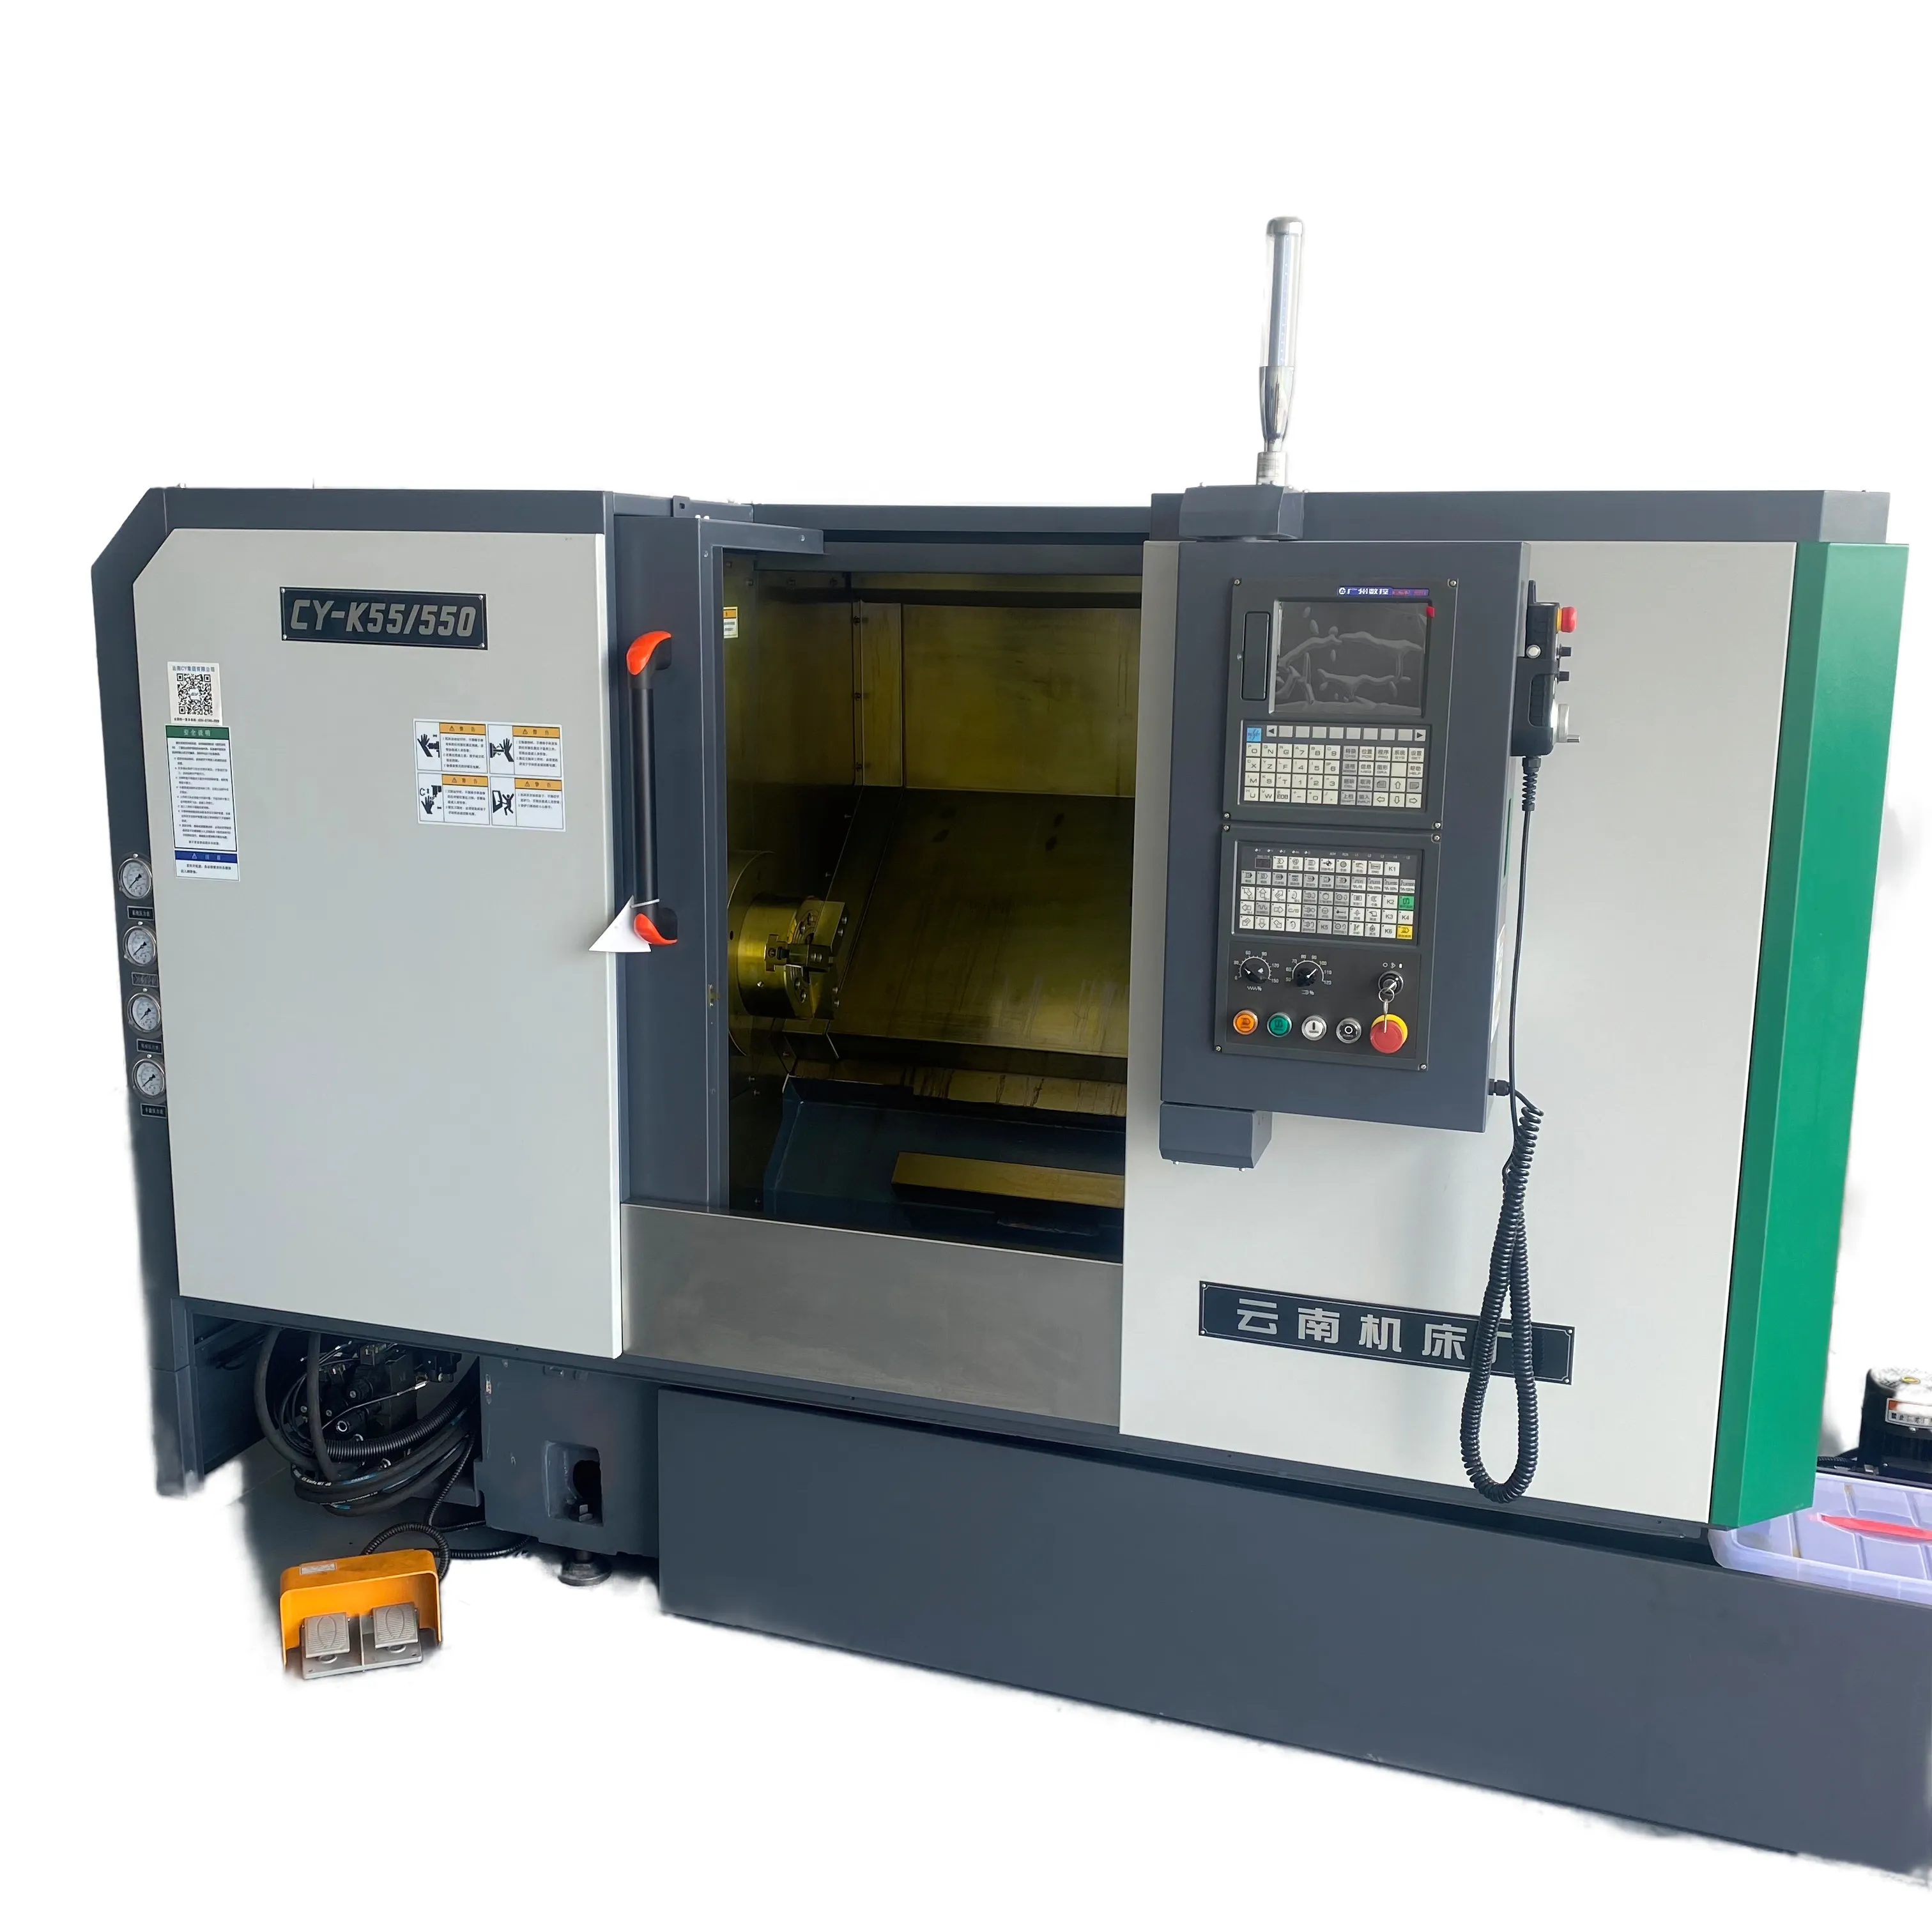 CY-K55/550 Durable Using Low Price Lathe Machine From China Type Cnc Automatic Lathe